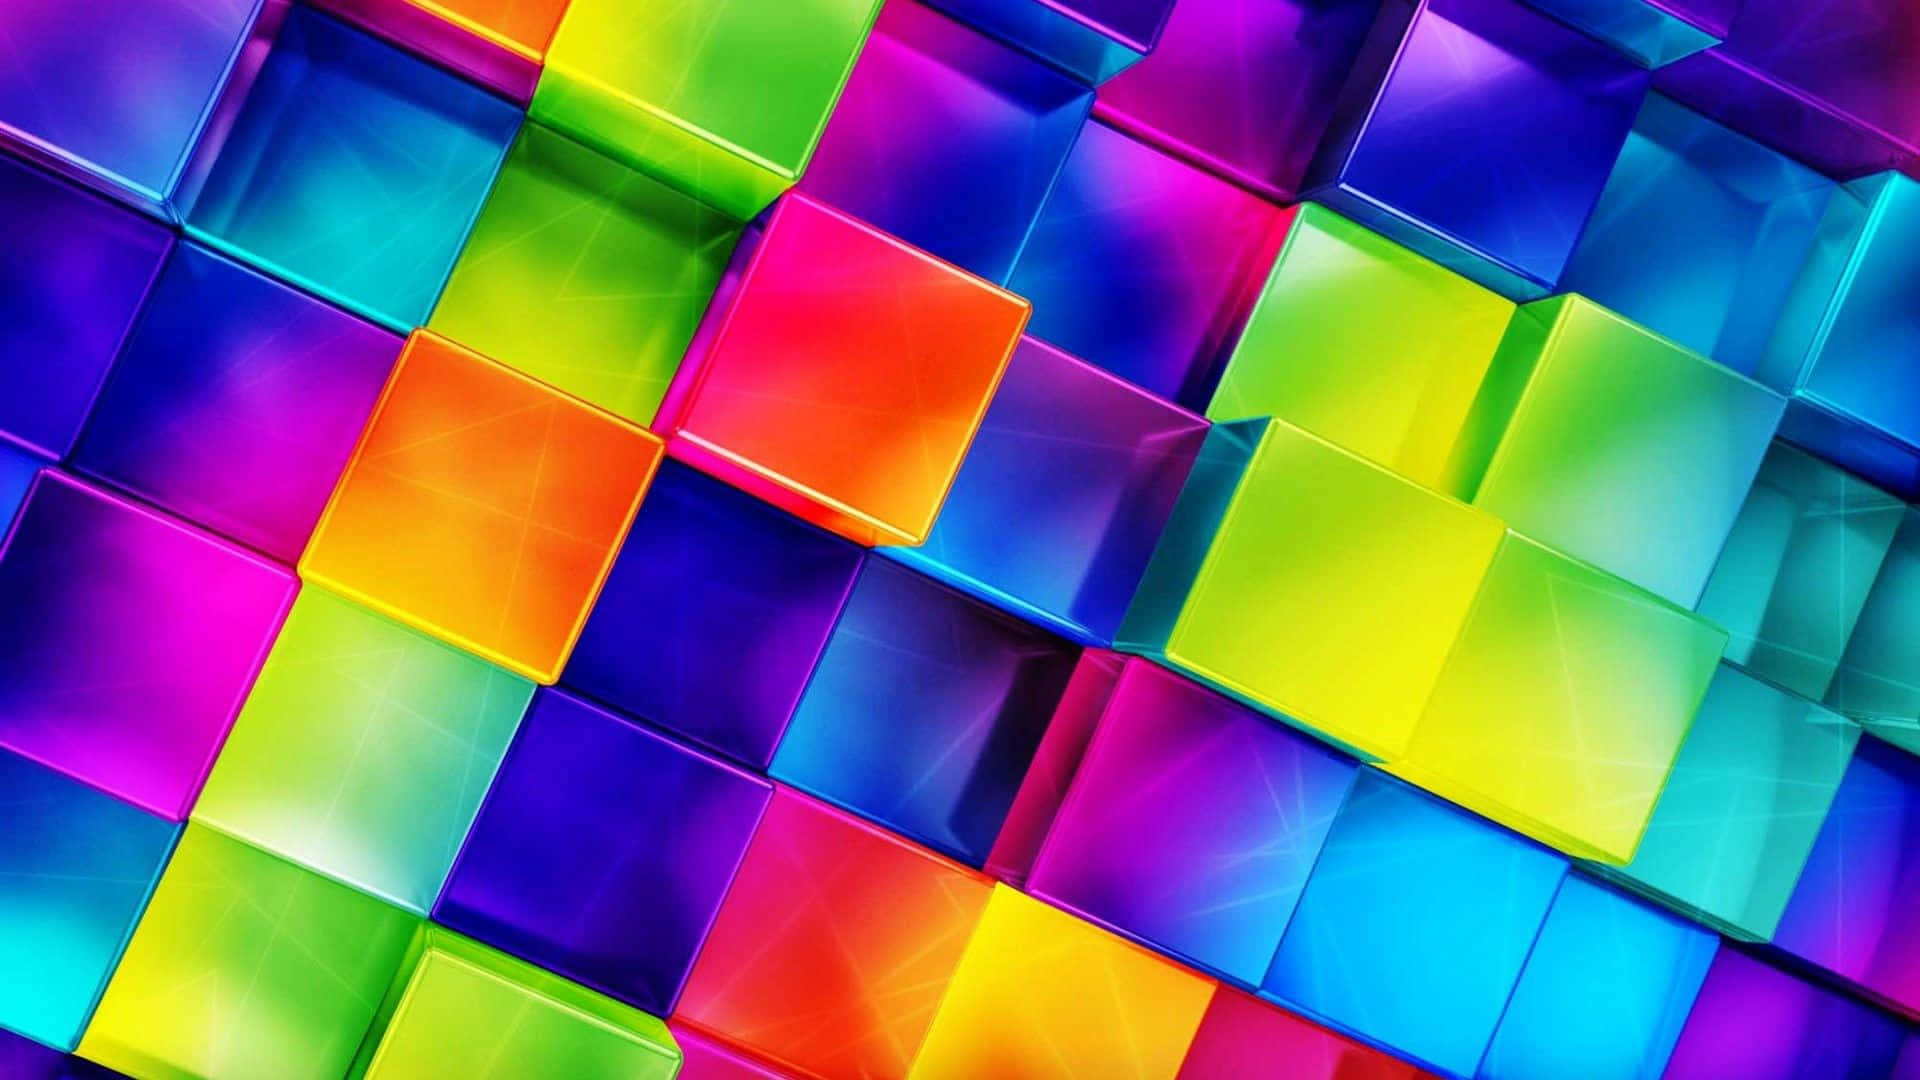 Bright Background Of Colorful 3D Cubes